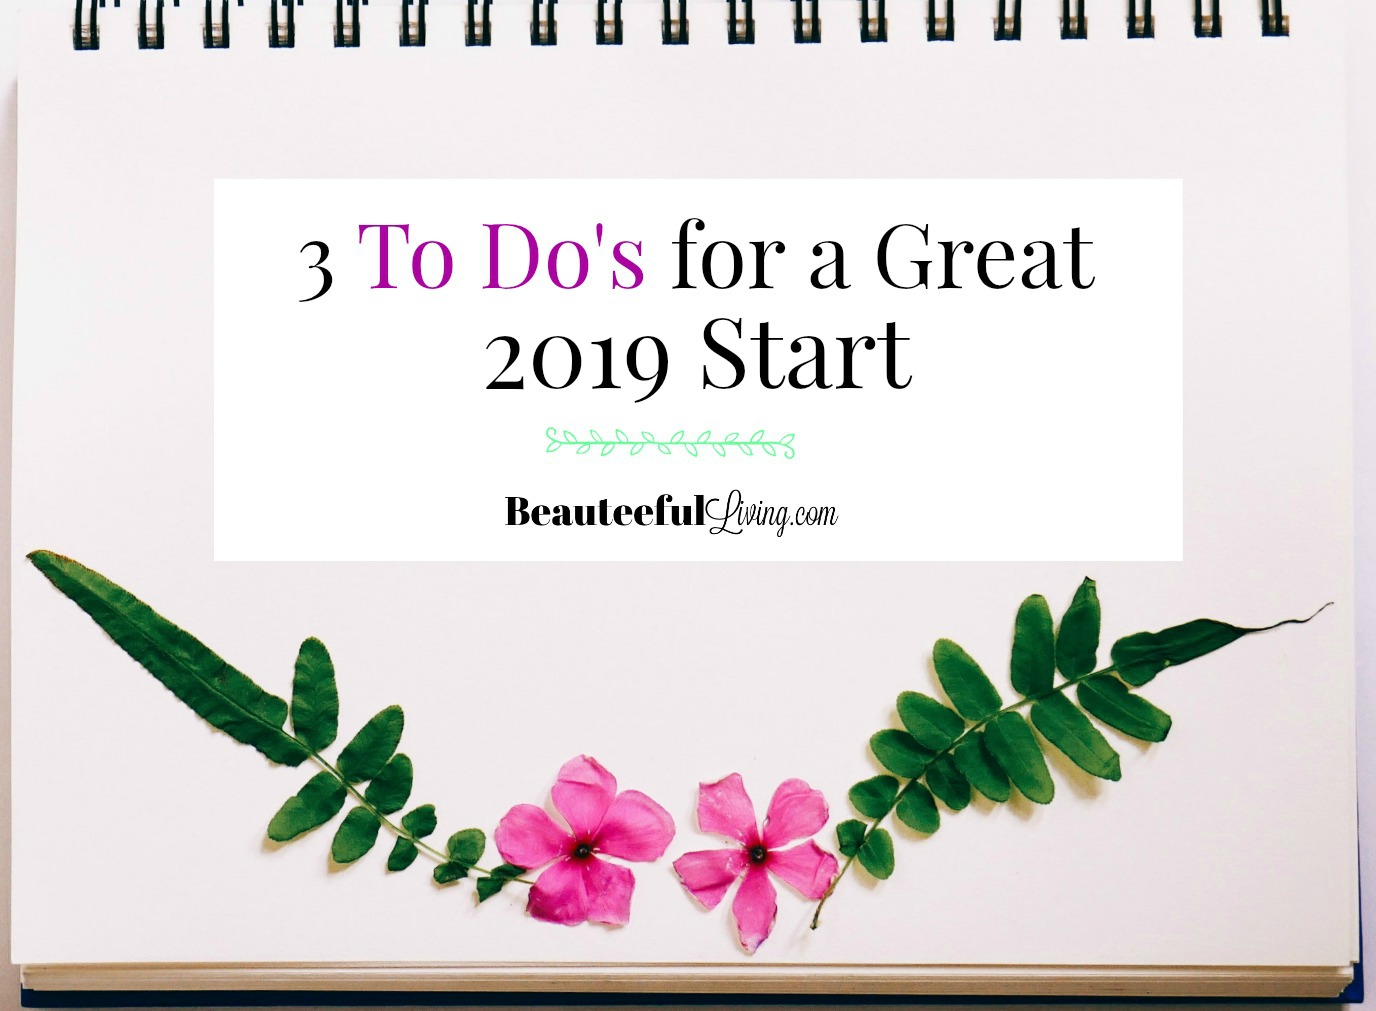 3 To Do's for Great 2019 Start